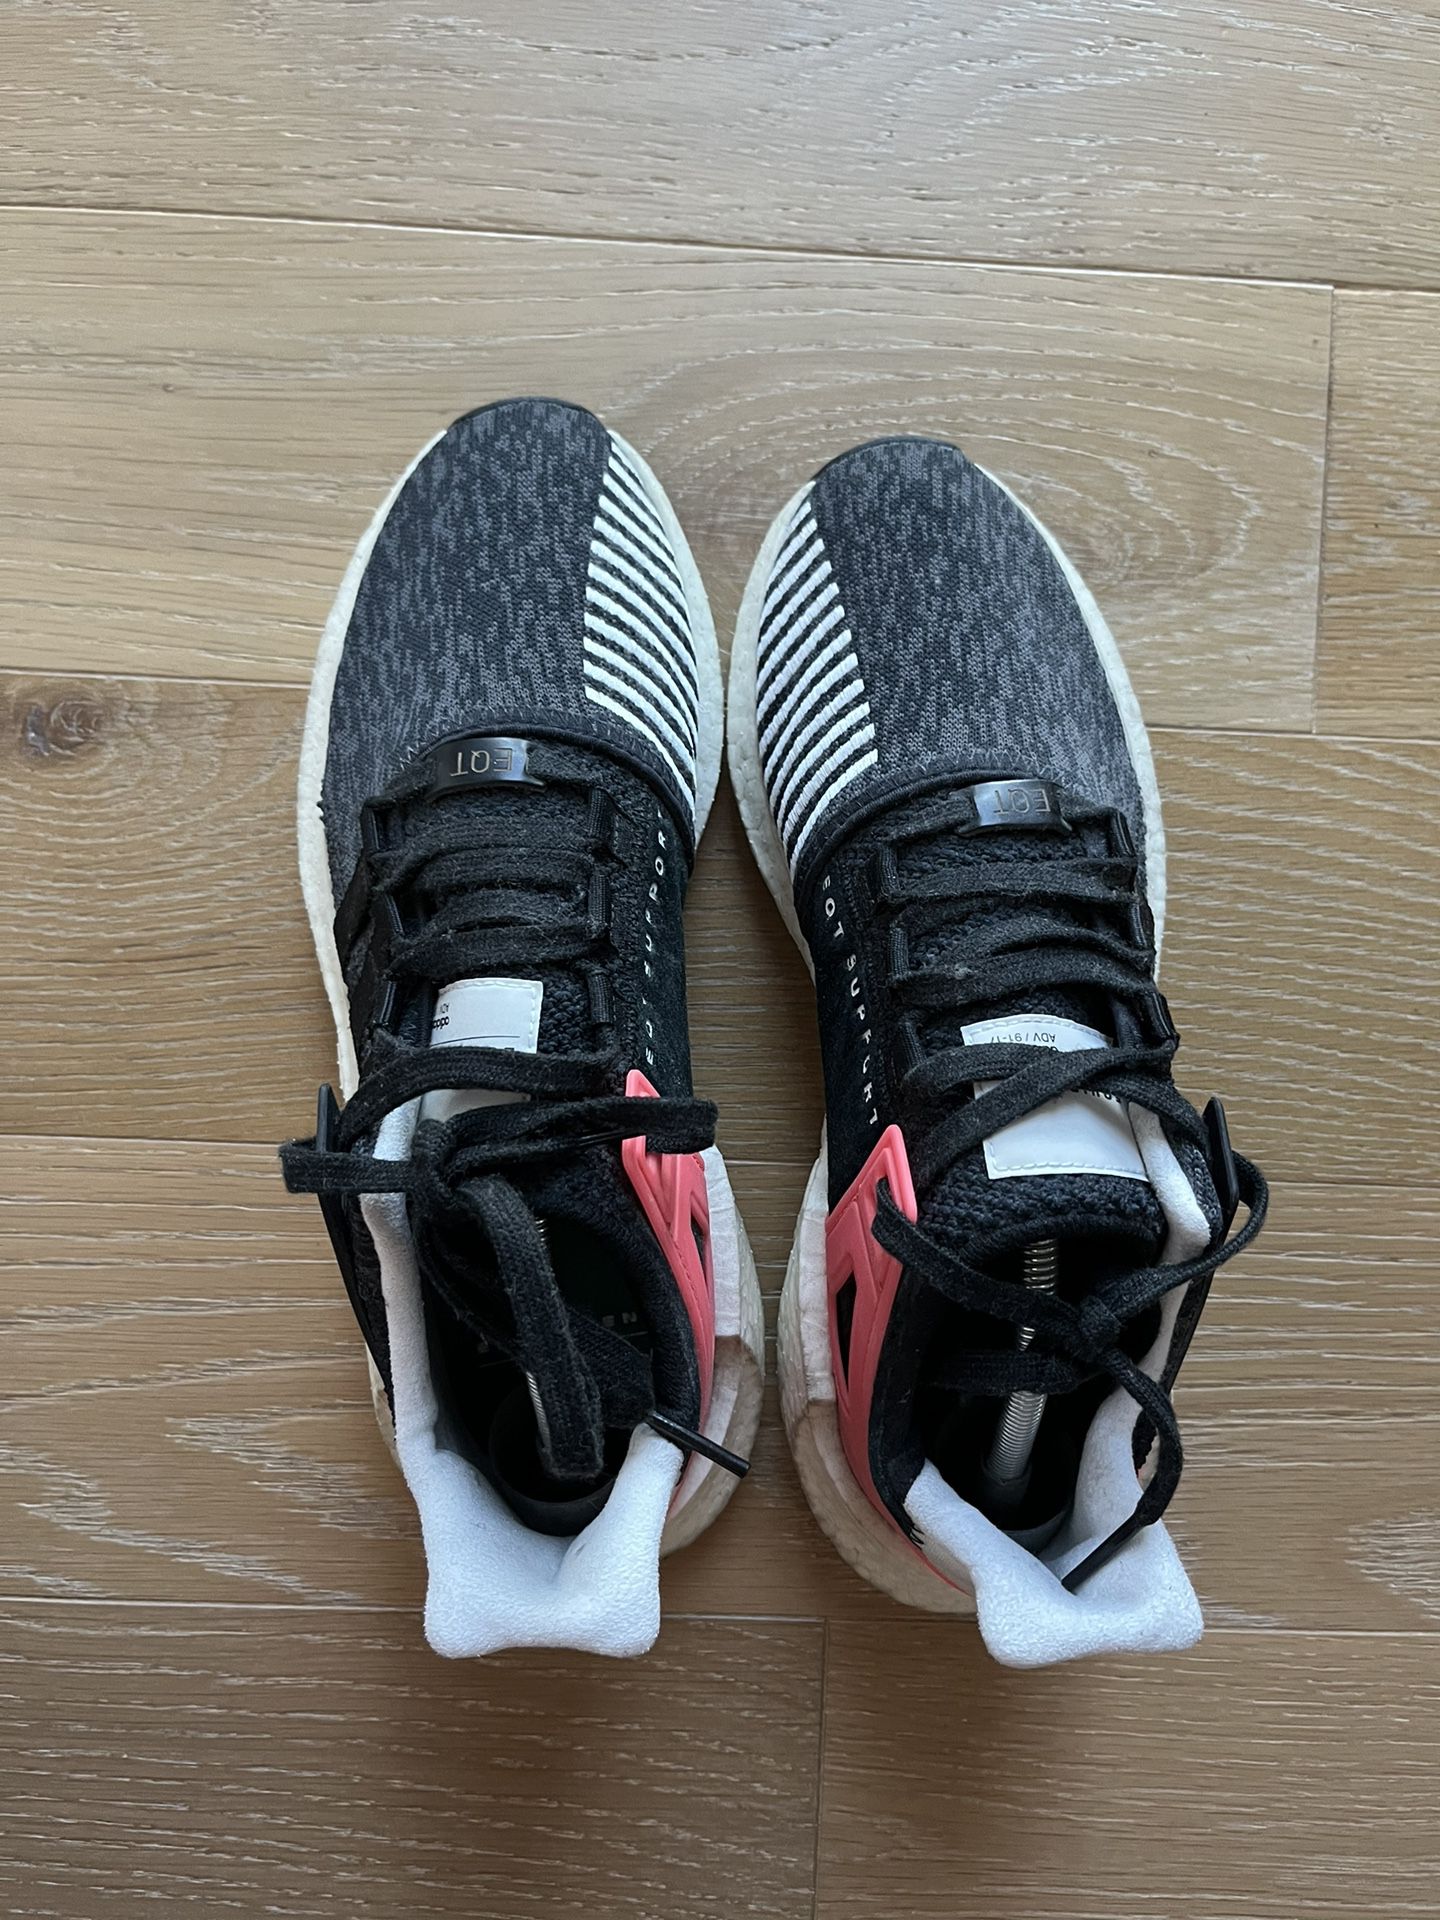 adidas eqt boost used for in Portland, OR OfferUp